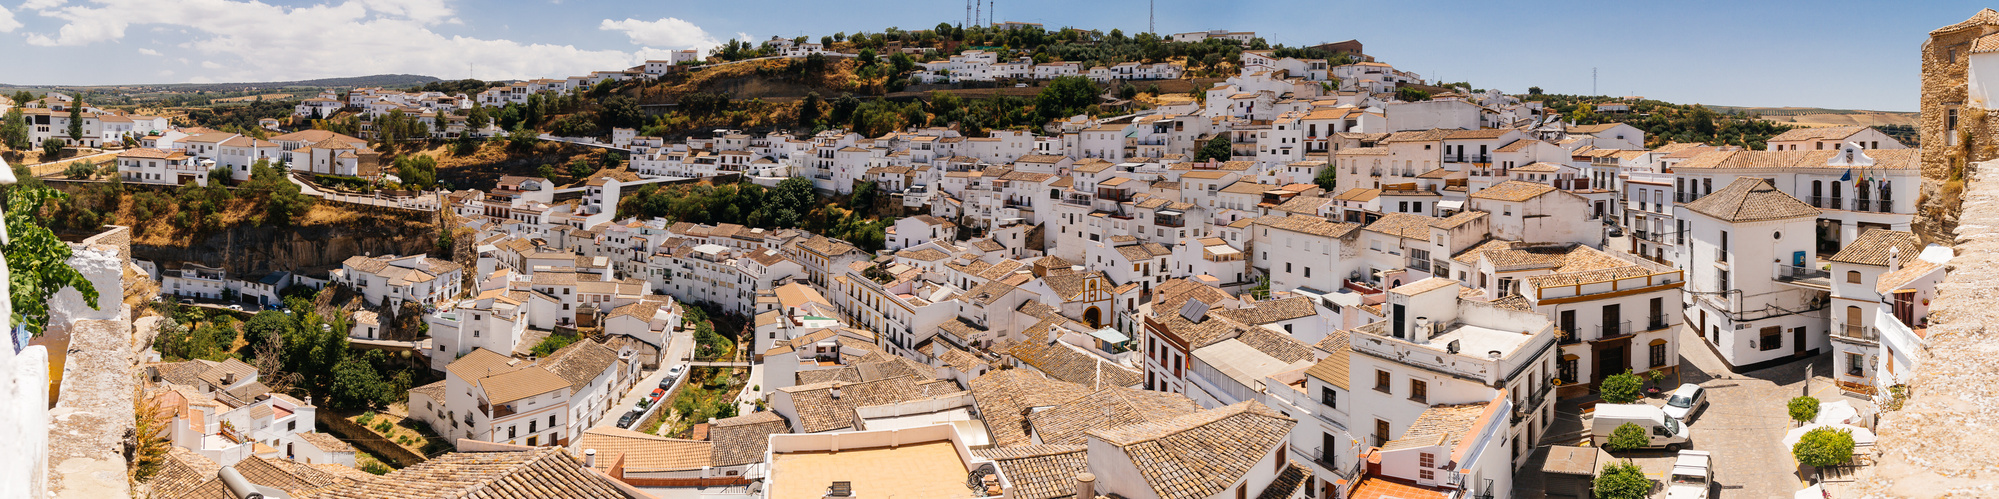 Panoramic view of the whitewashed buildings and green hillside of Setenil de las Bodegas, Spain 